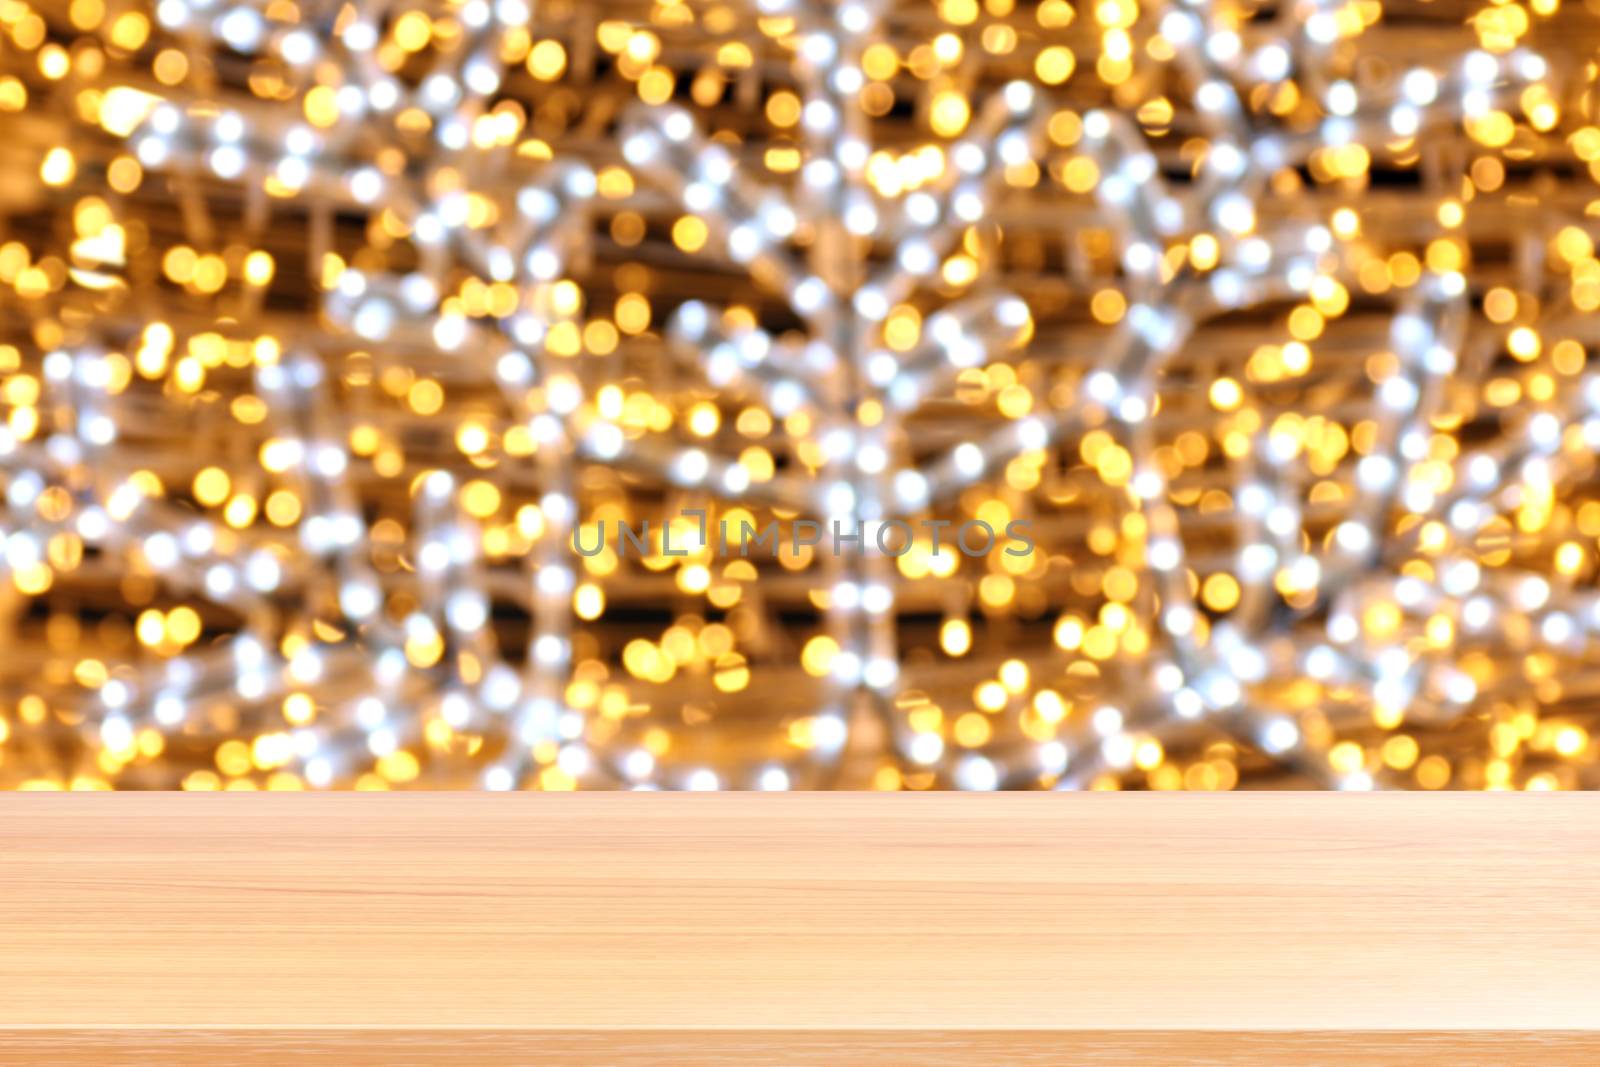 wood plank on bokeh golden yellow colorful christmas background, empty wood table floors on bokeh glitter light gold luxury, wood table board empty front glittering gold, wood on bokeh lighting shine by cgdeaw